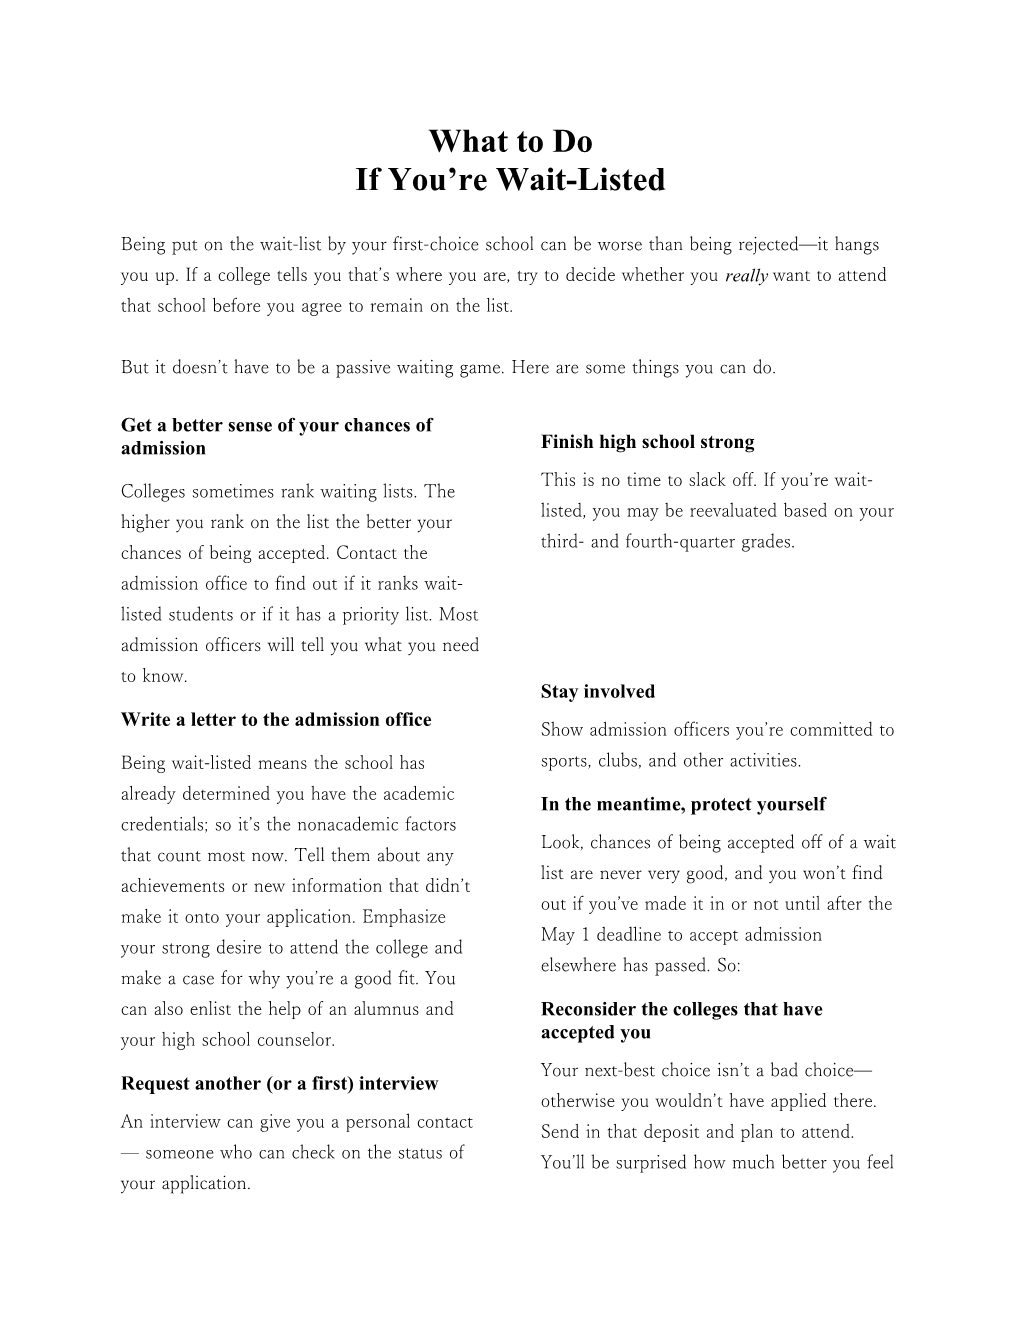 What to Do If You Re Wait-Listed